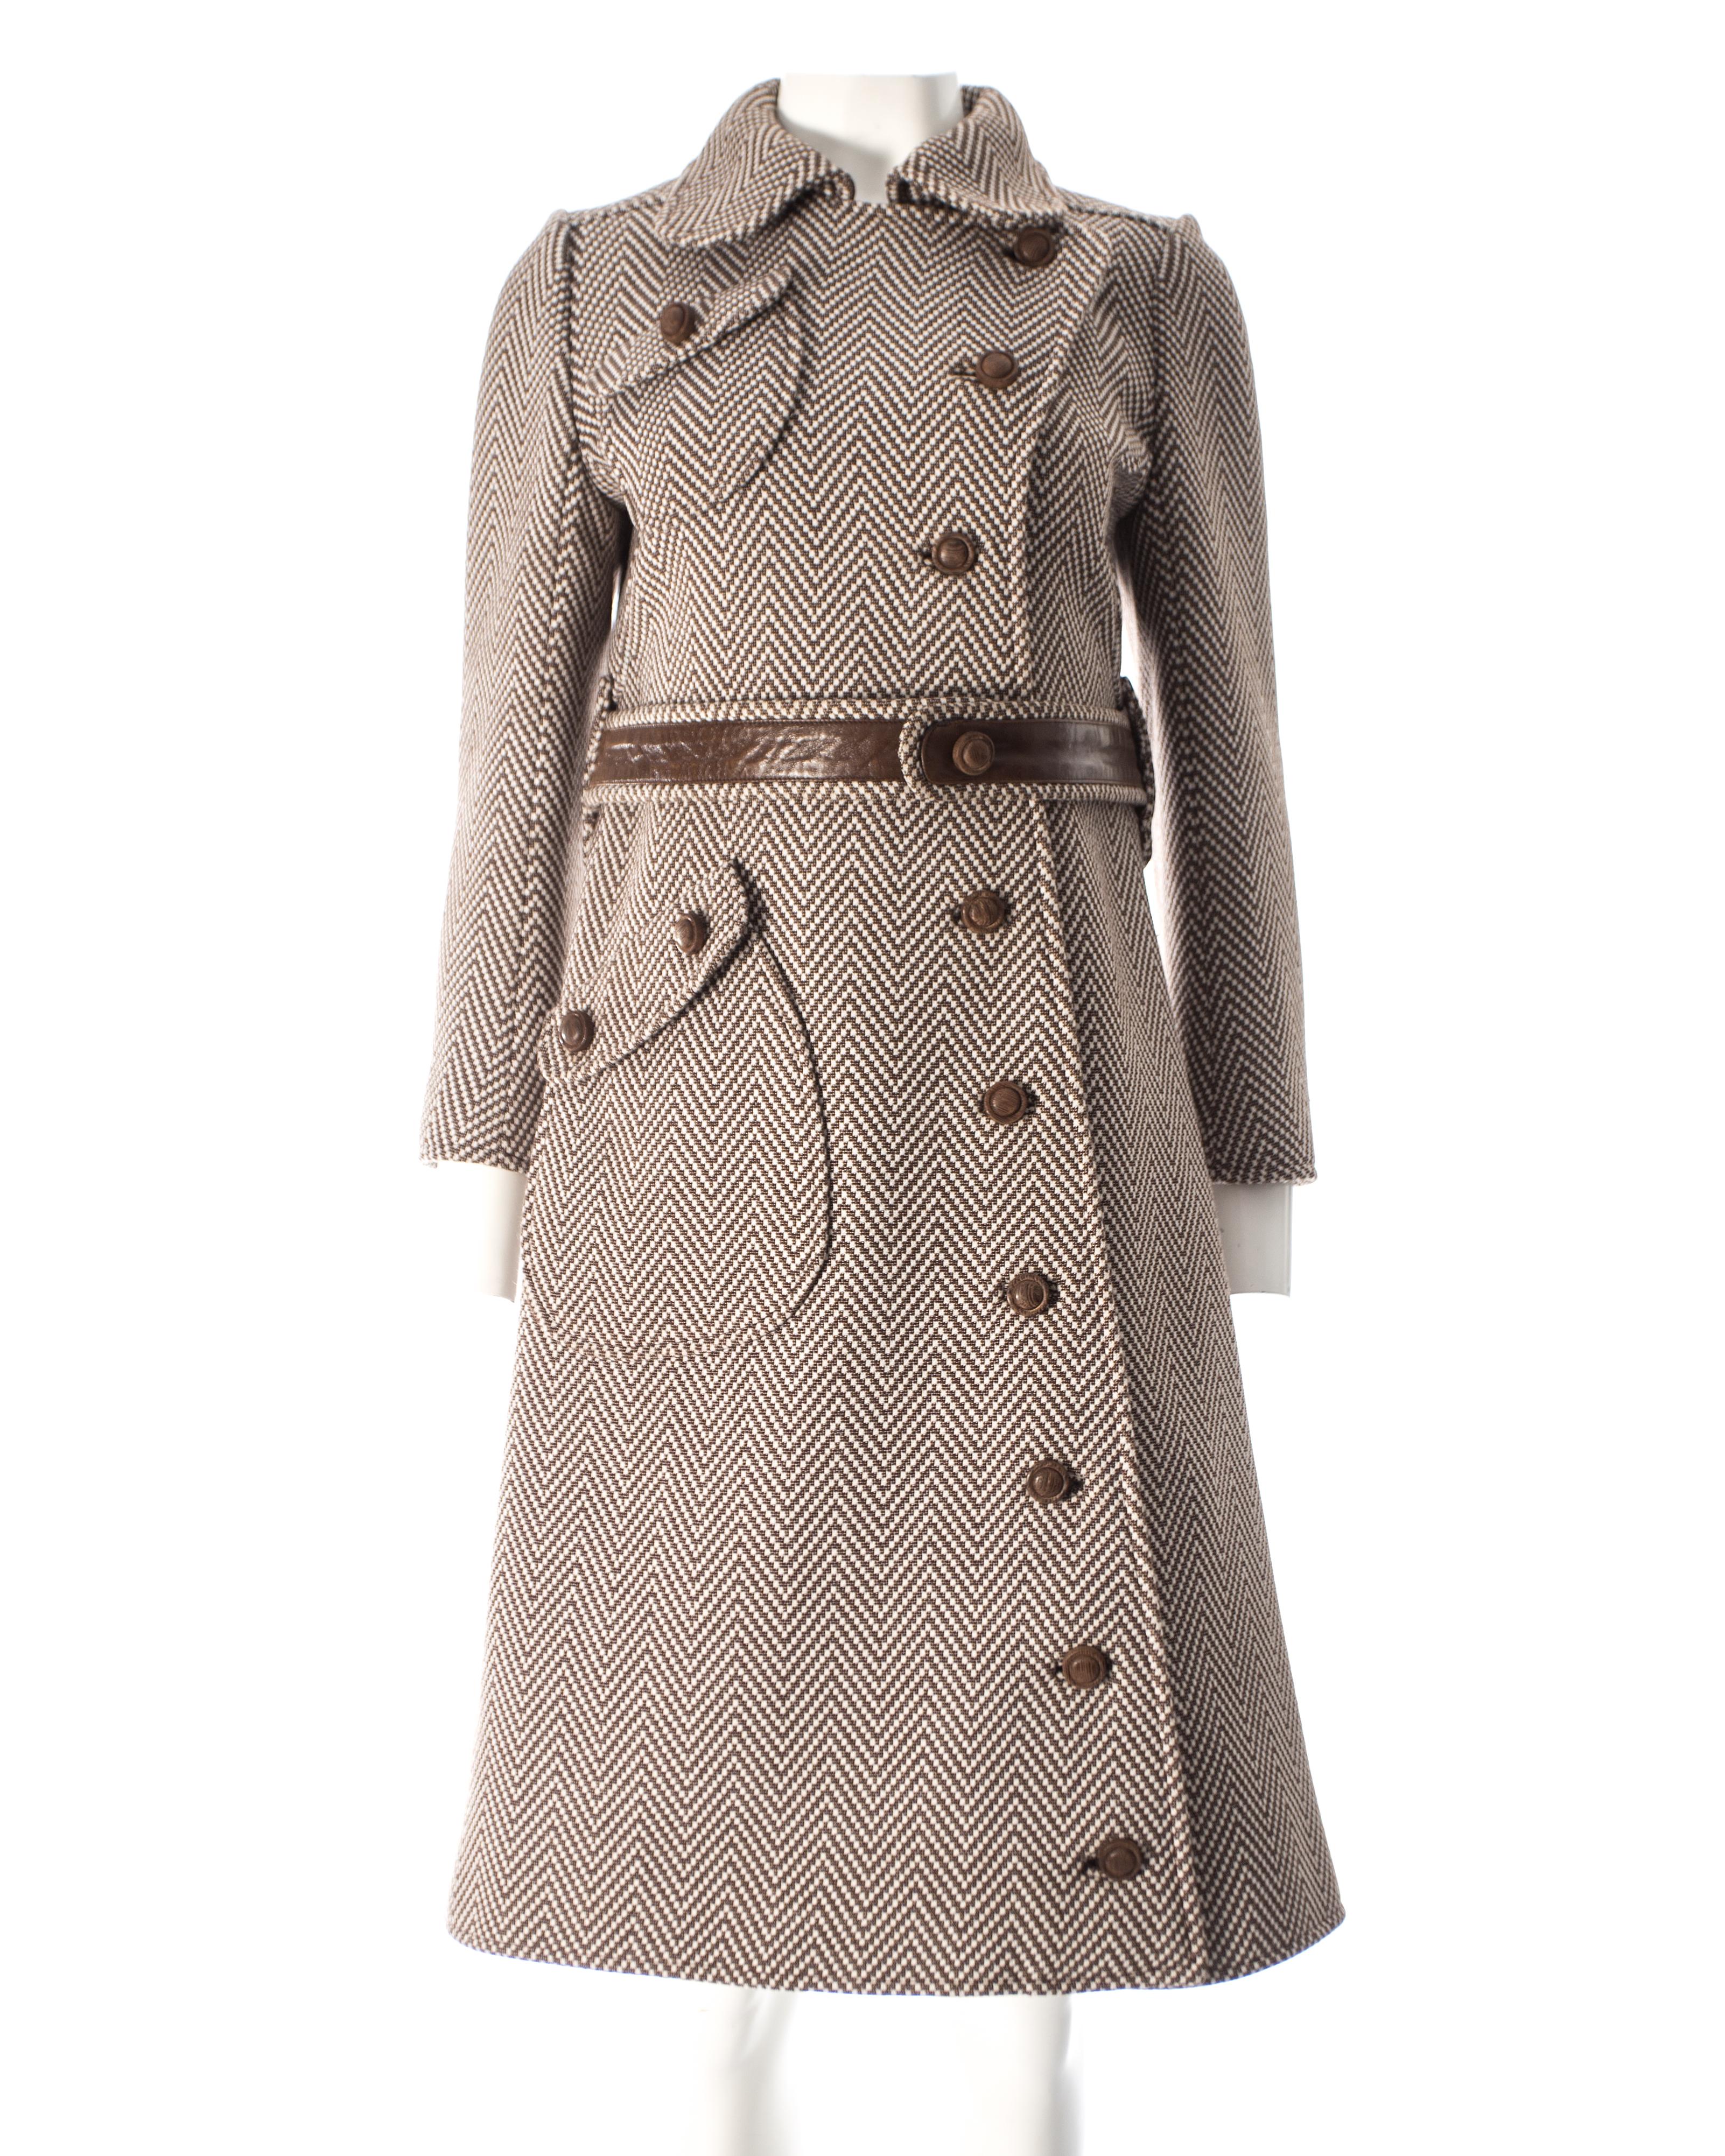 - Haute Couture 
- Large wooden buttons 
- Leather belt with matching wool backing and snap button closures 
- Silk lining 
- 2 front flap pockets 

c. 1969